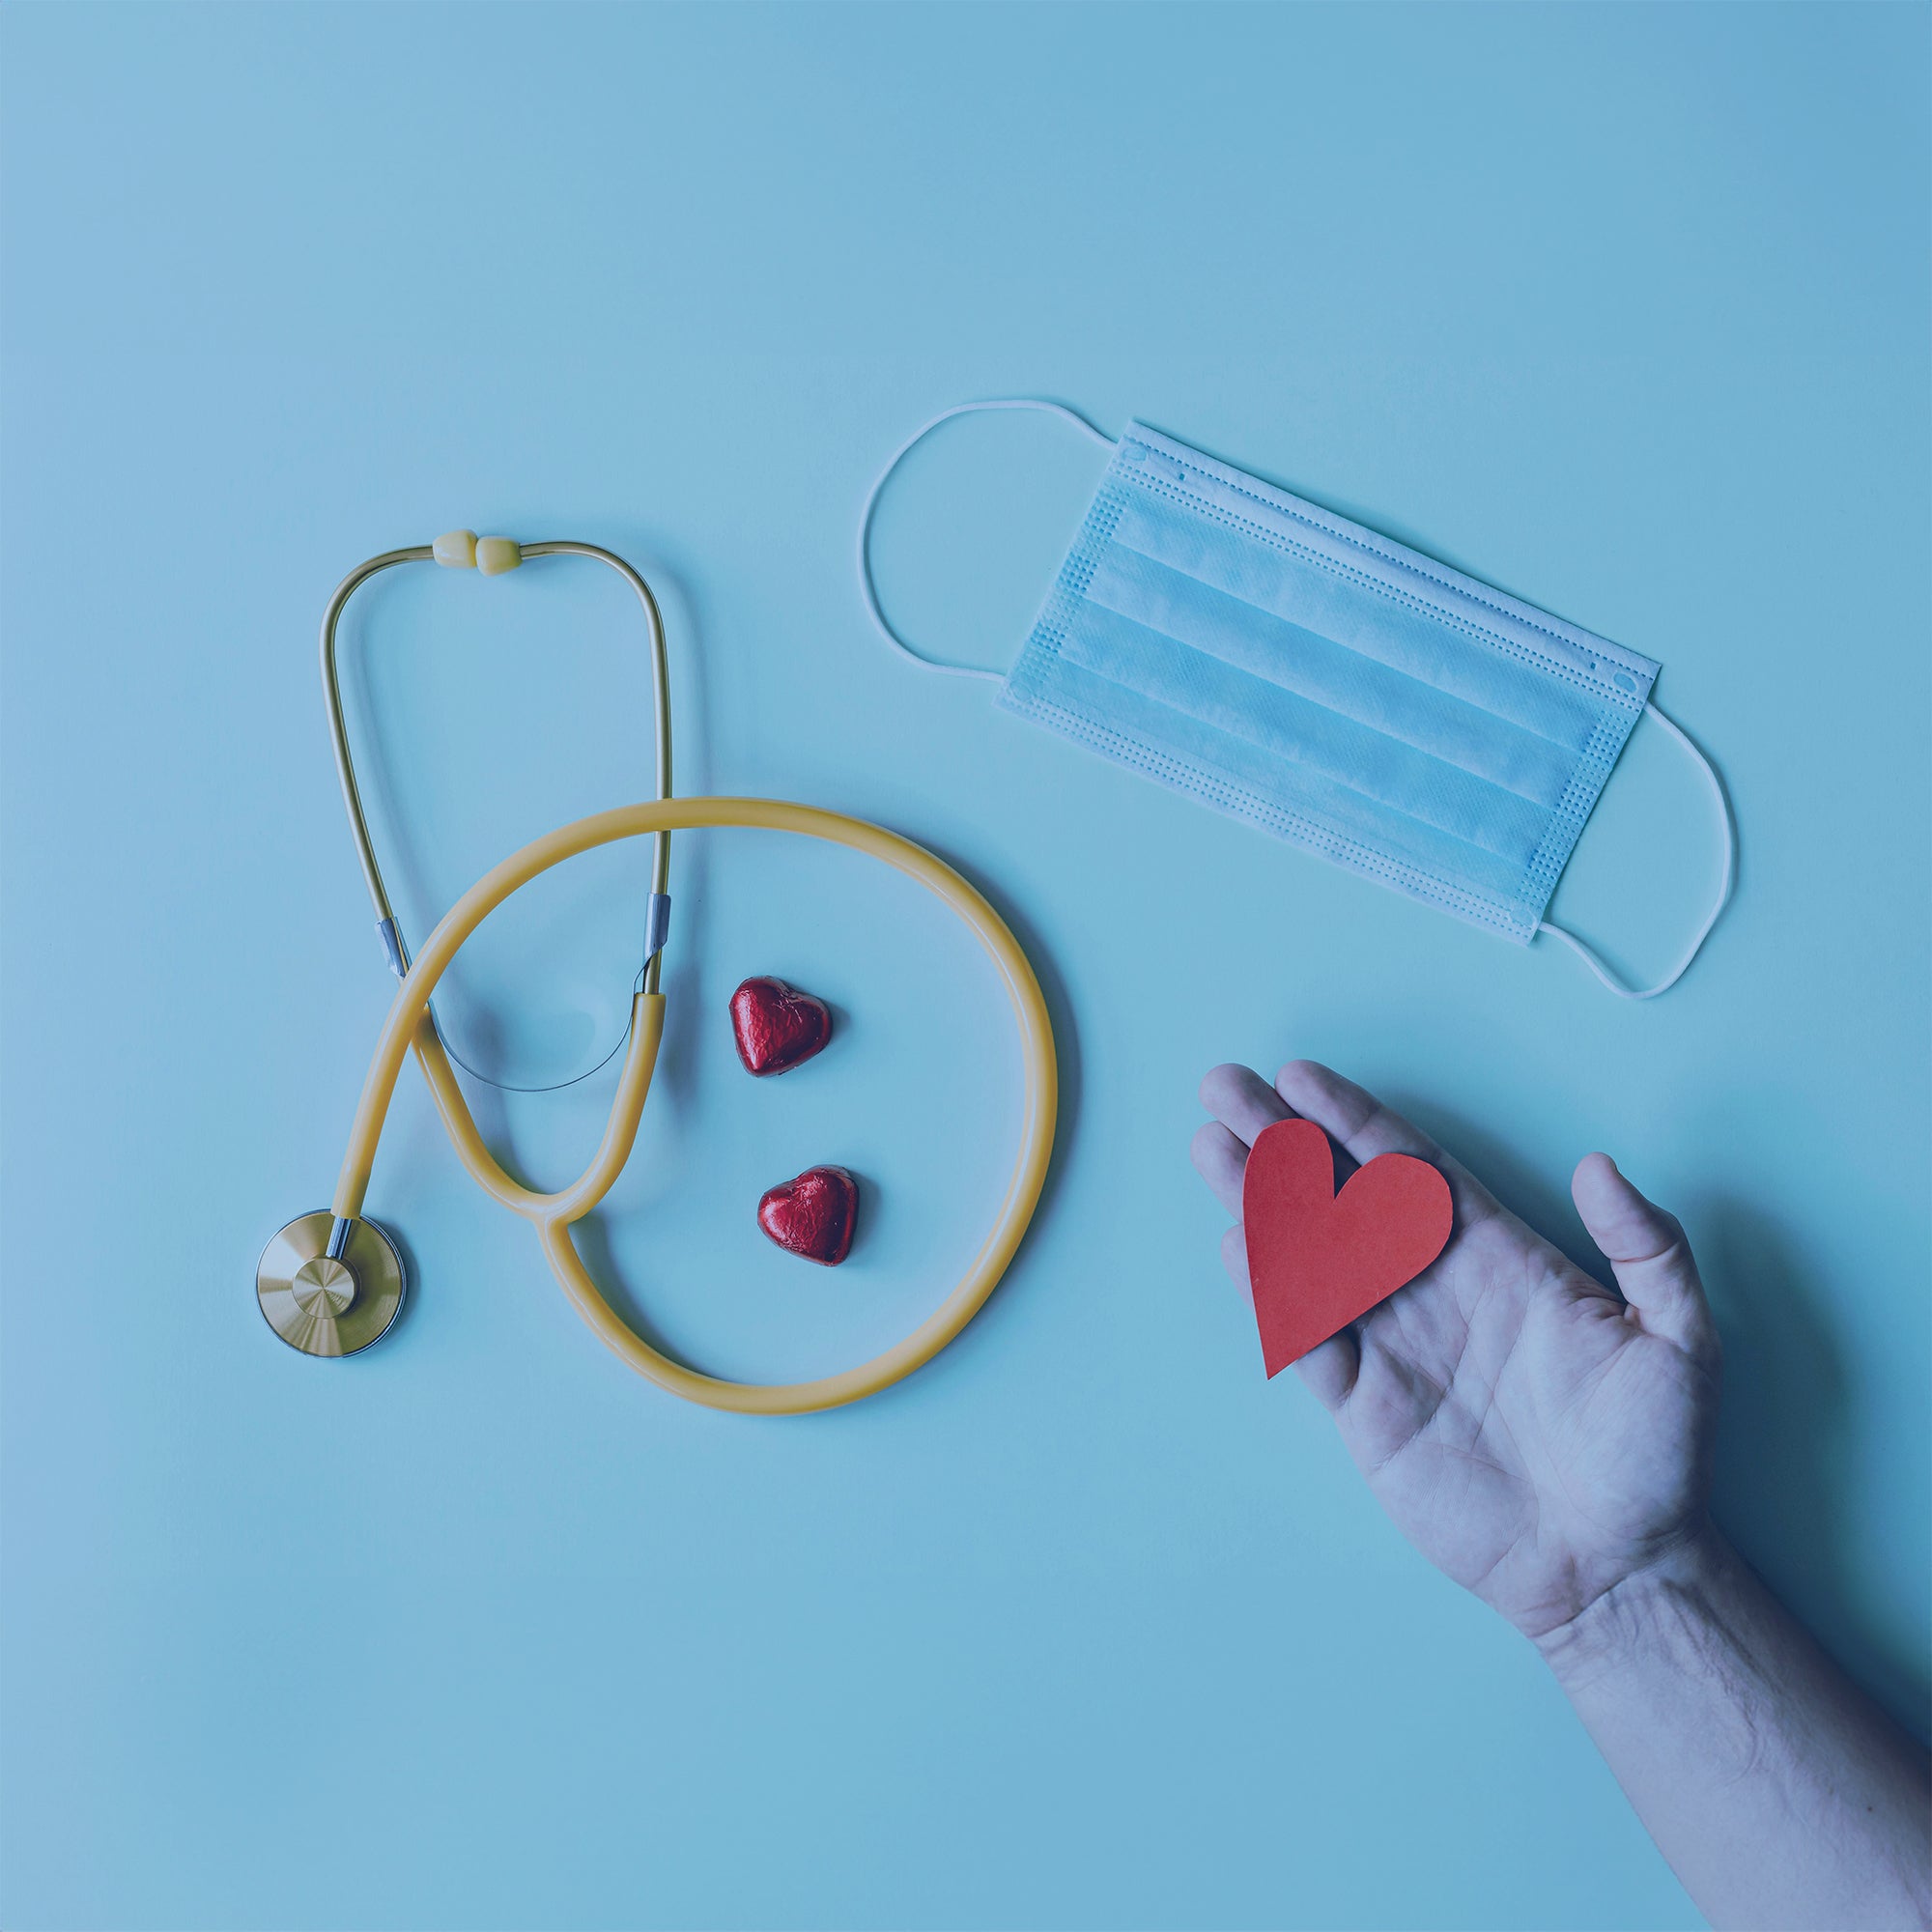 Stethescope, a mask and a hand holding a paper heart